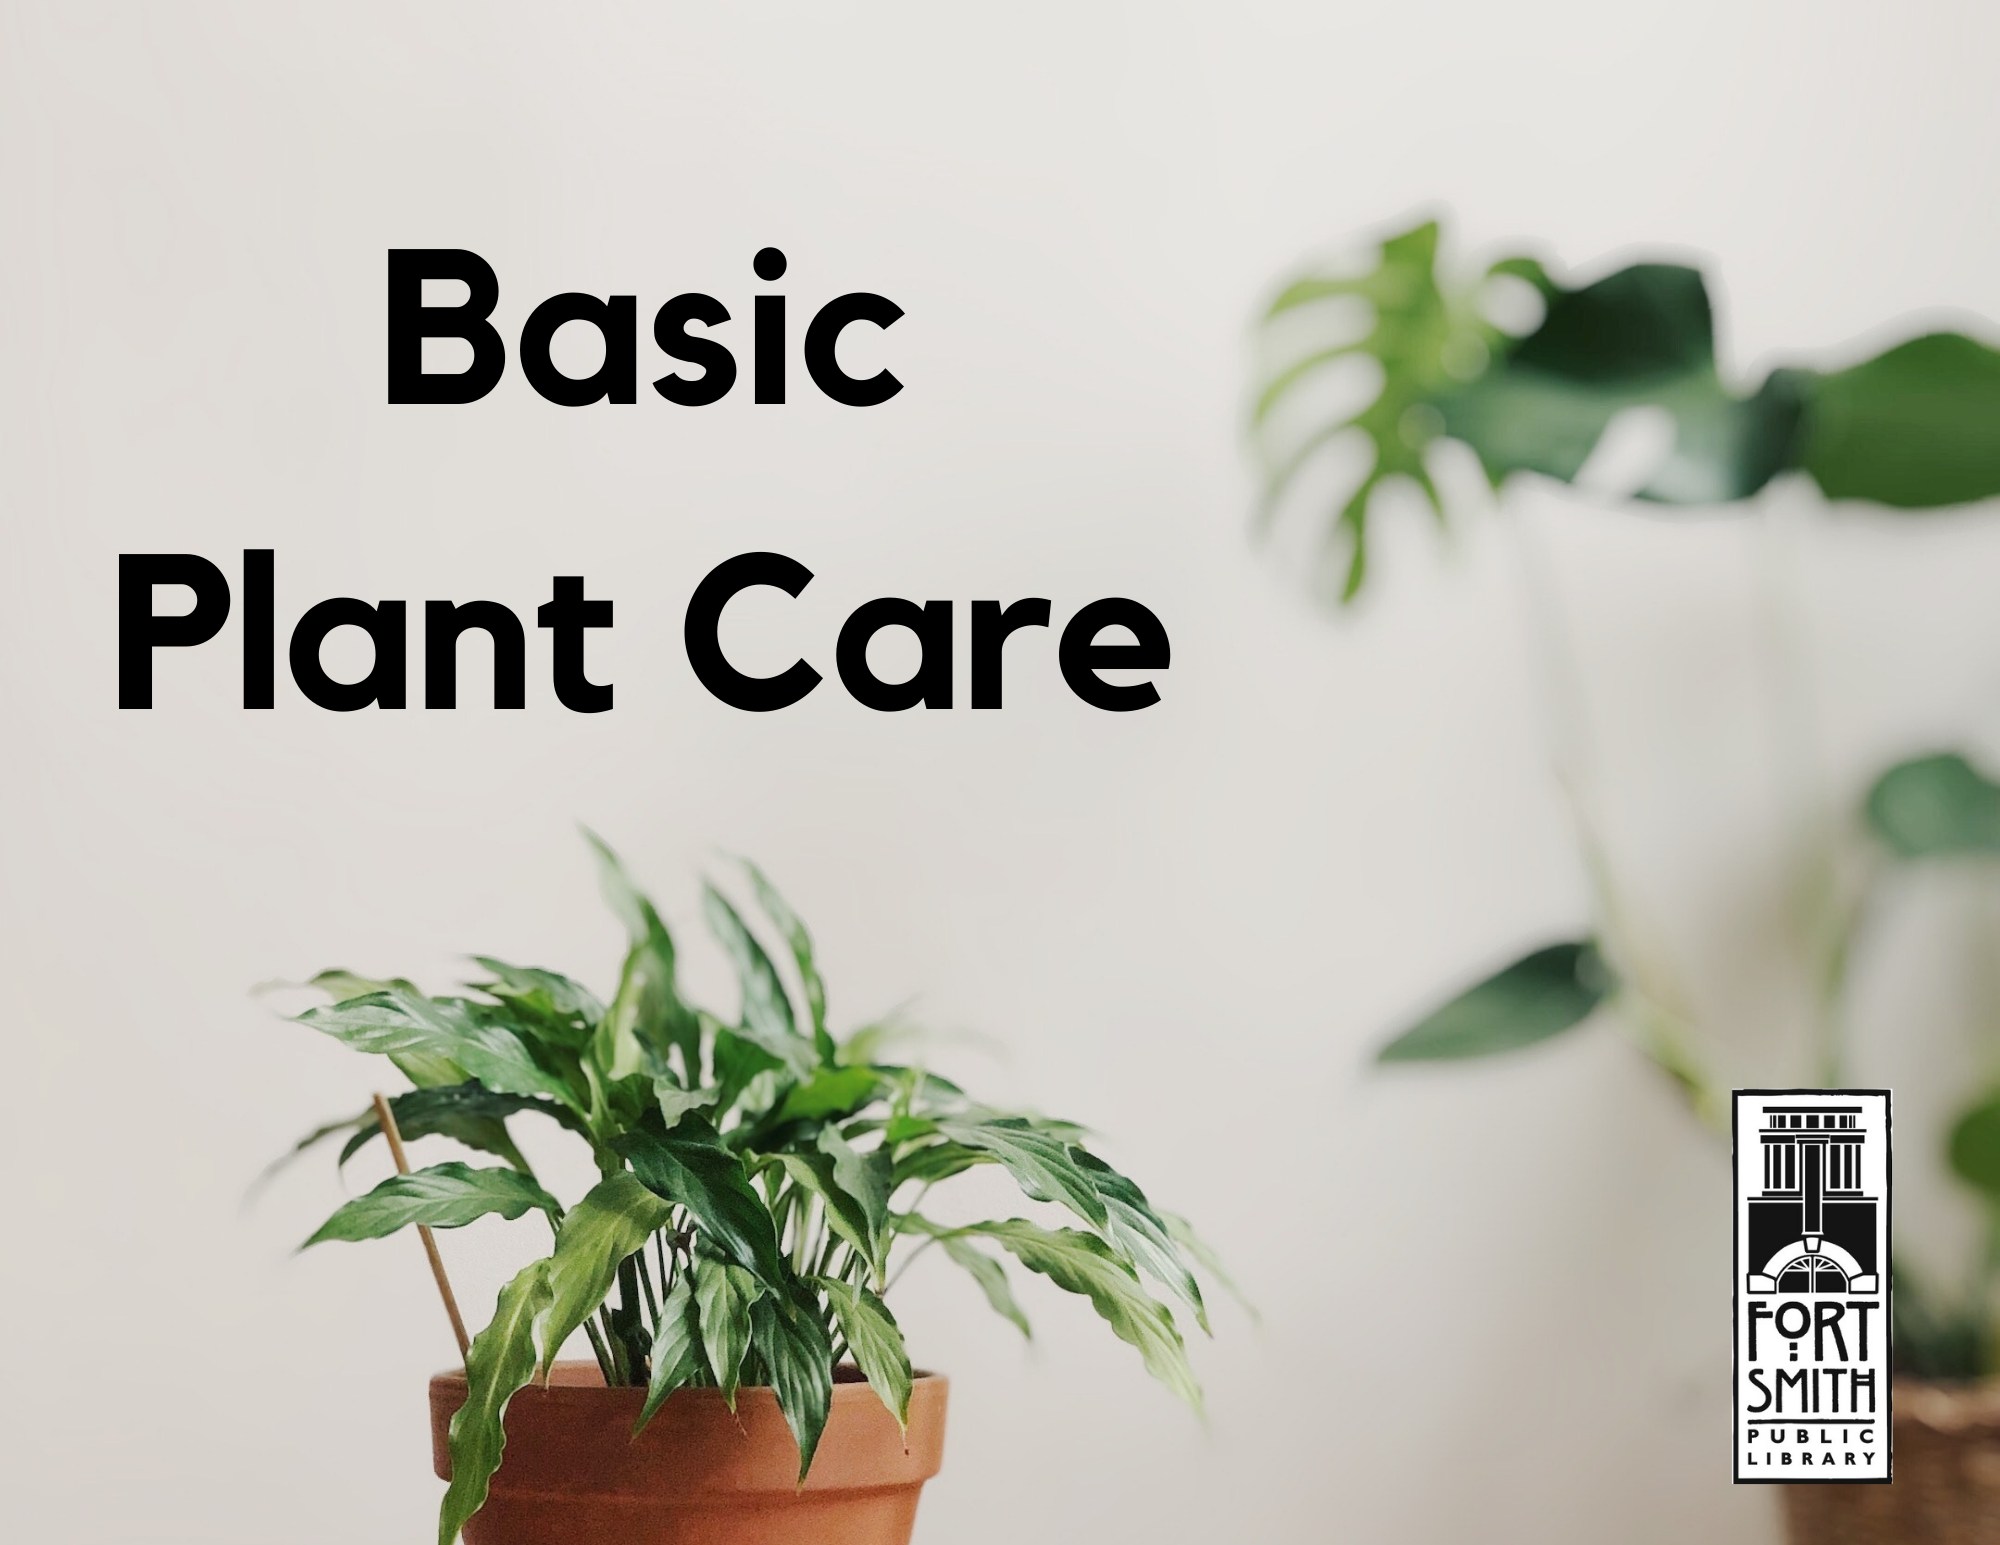 Basic Plant Care in black wording against a beige background. It has a couple of green plants with one in a tan pot and other is coming from off the border. 